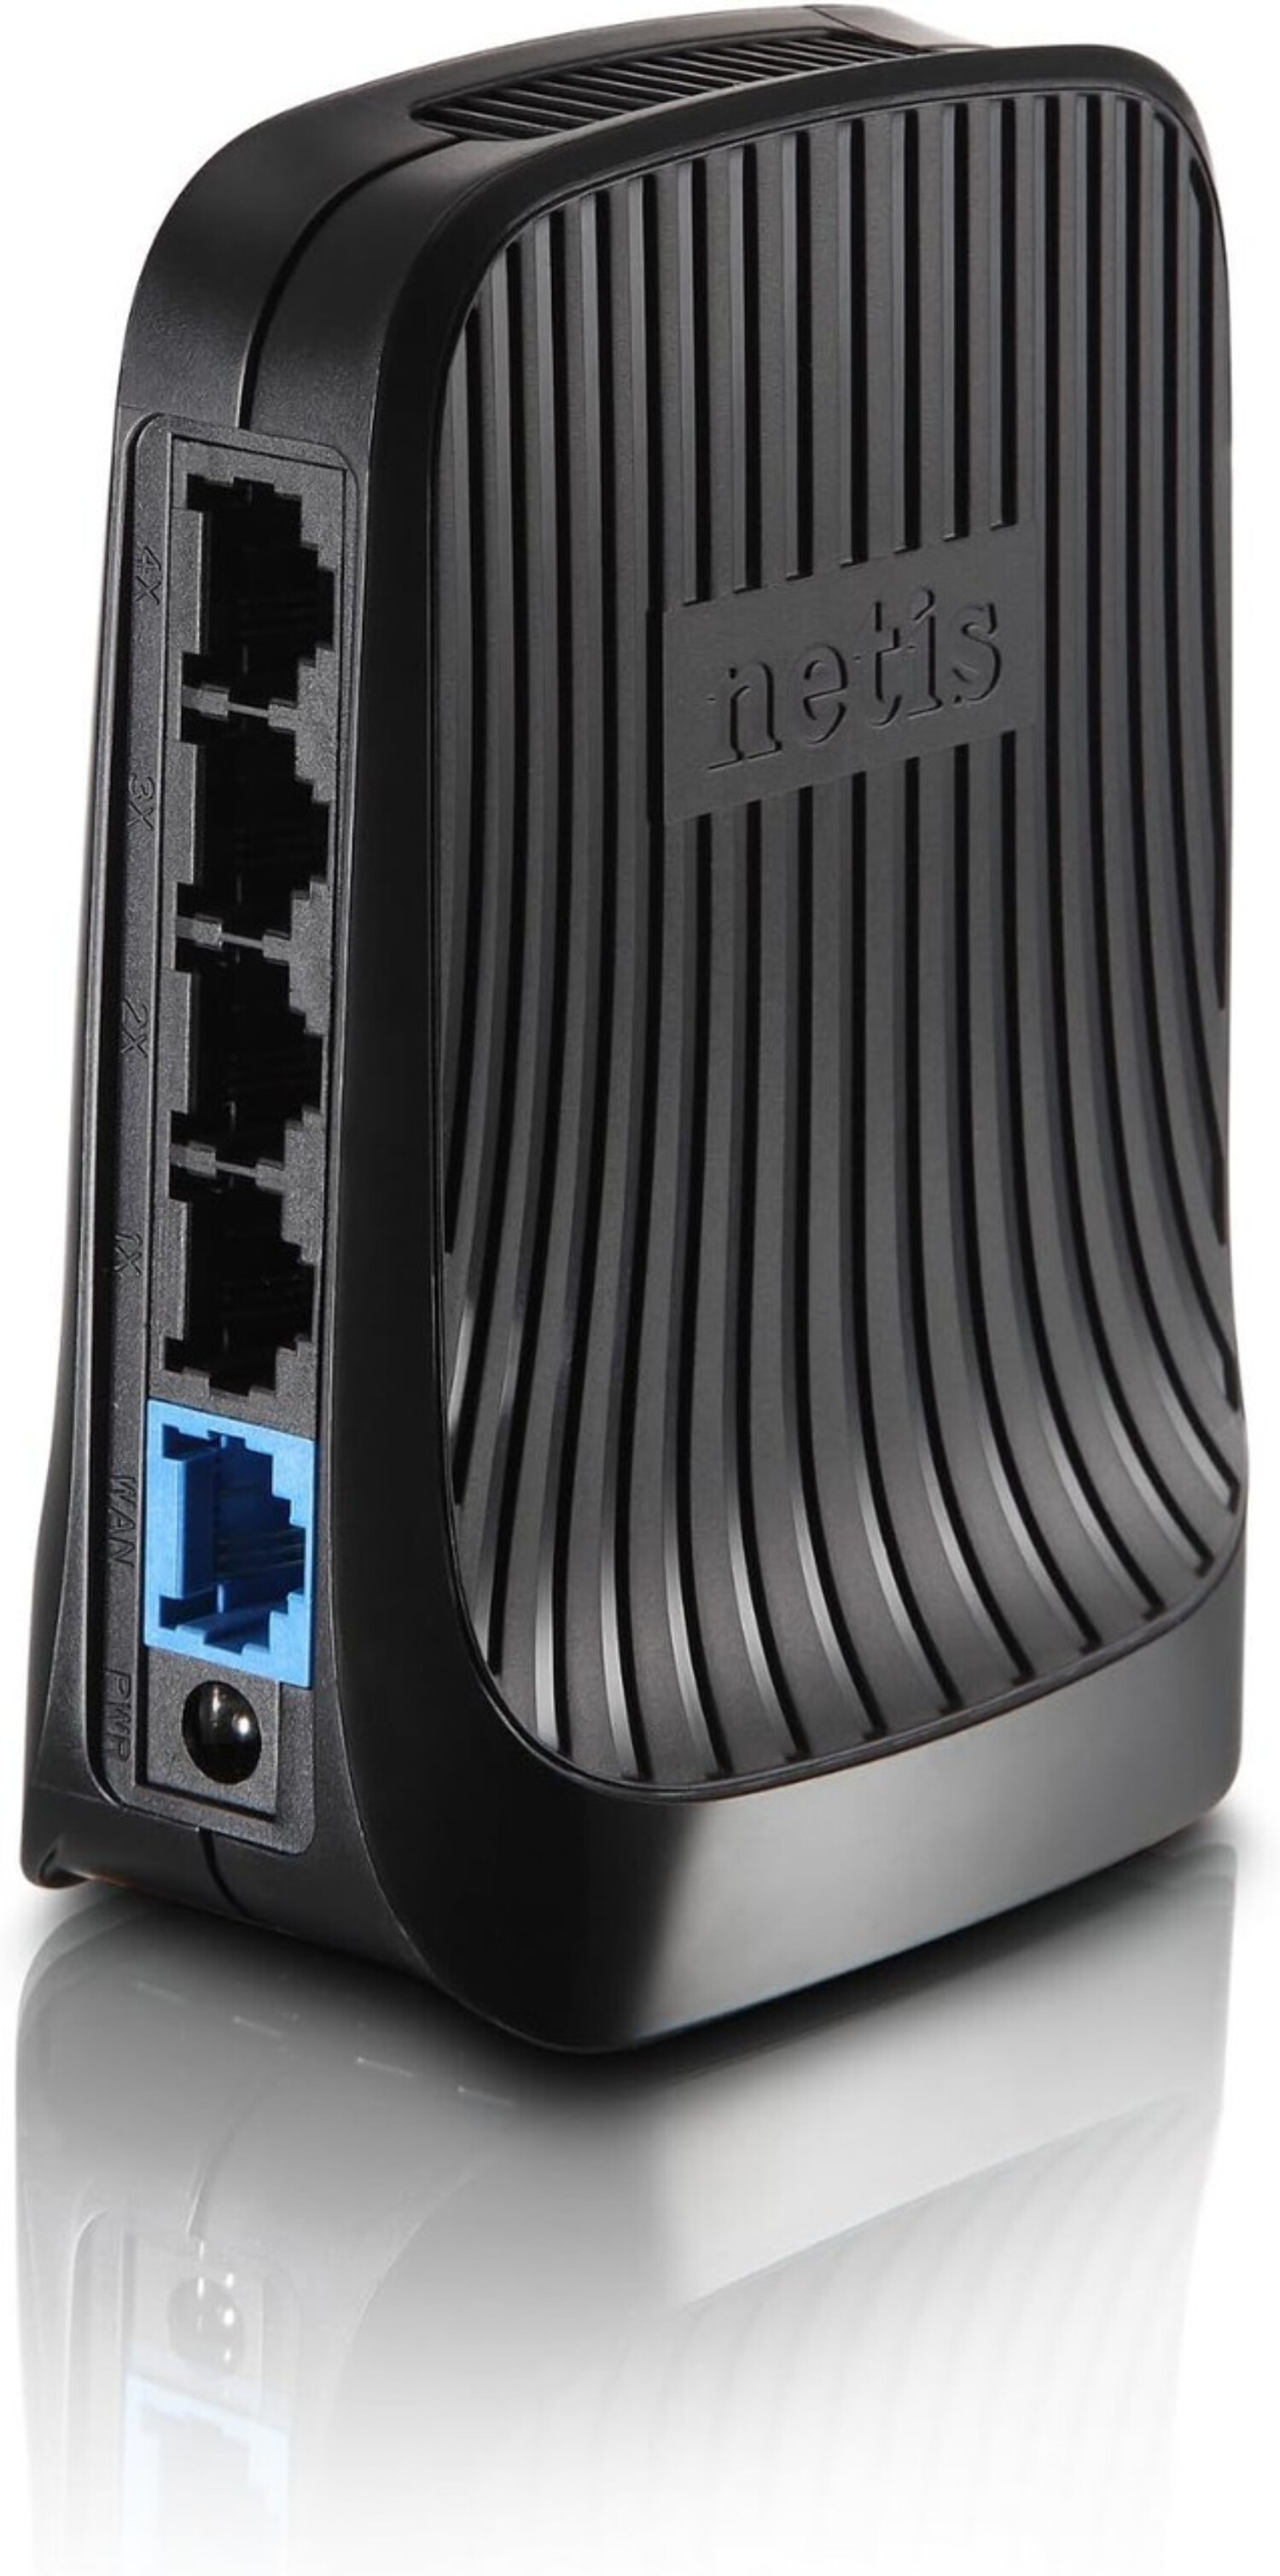 Netis WF2412 - Wireless router - 4-port switch - Wi-Fi - 2.4 GHz - image 2 of 6